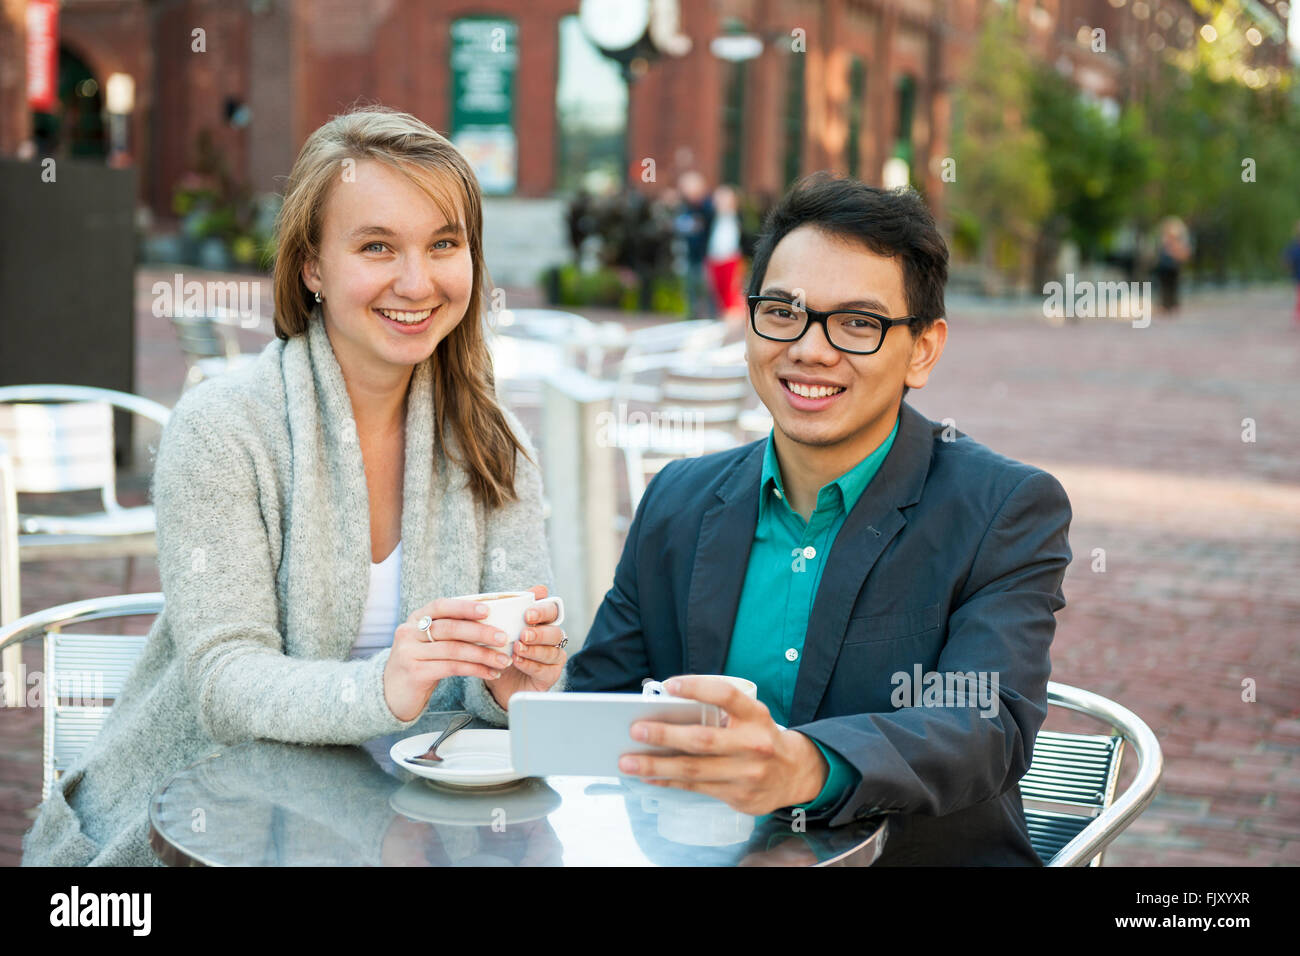 Deux jeunes gens souriants avec mobile device while sitting at outdoor cafe table on city street Banque D'Images